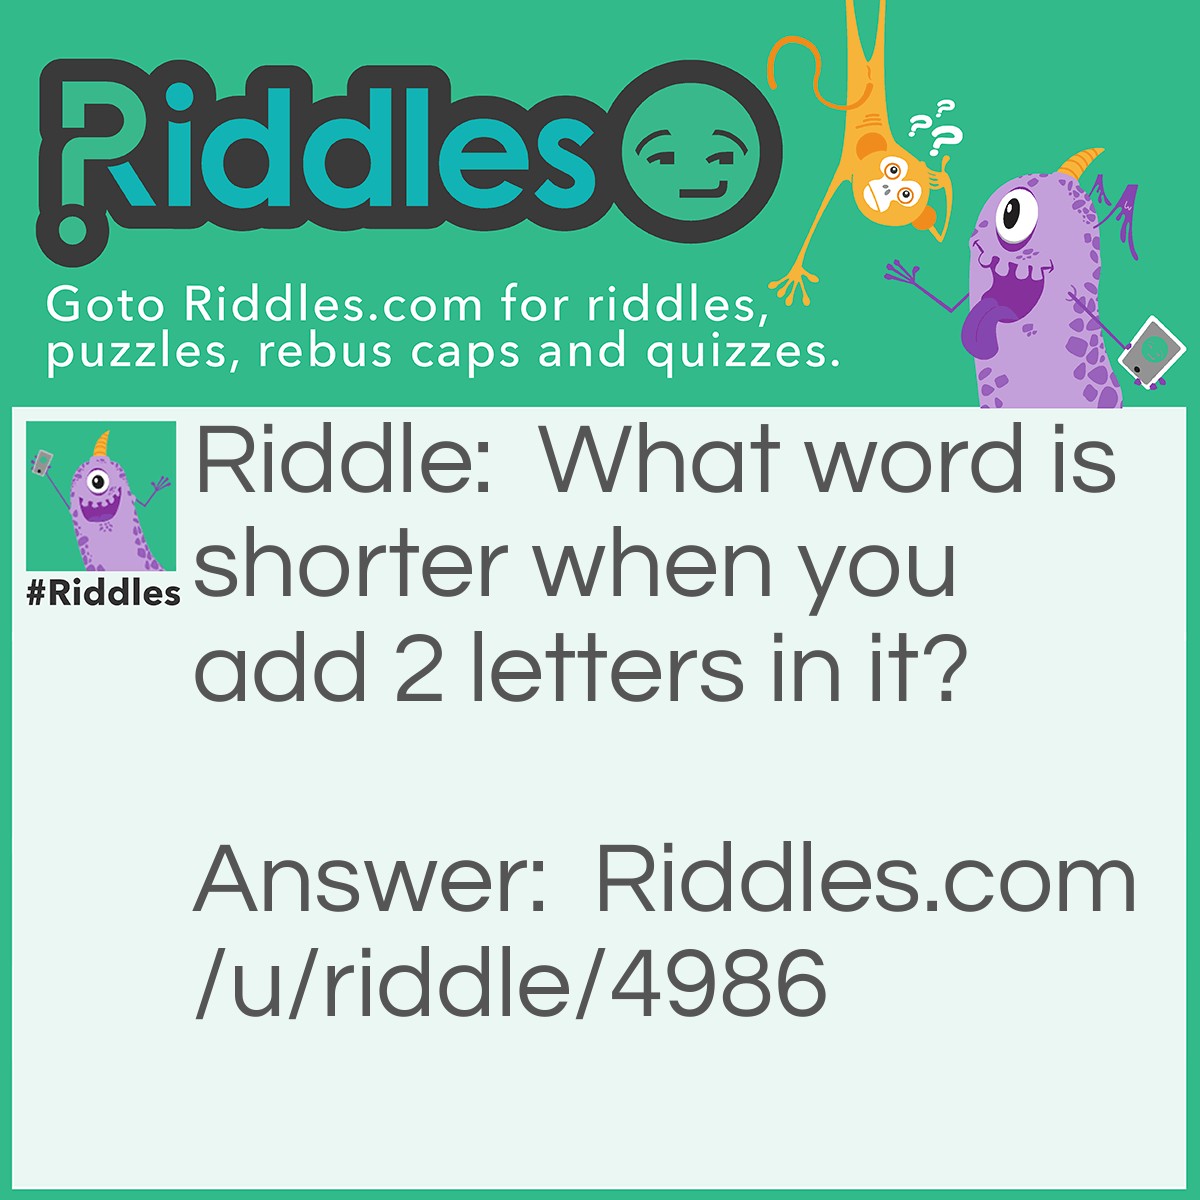 Riddle: What word is shorter when you add 2 letters in it? Answer: Short.